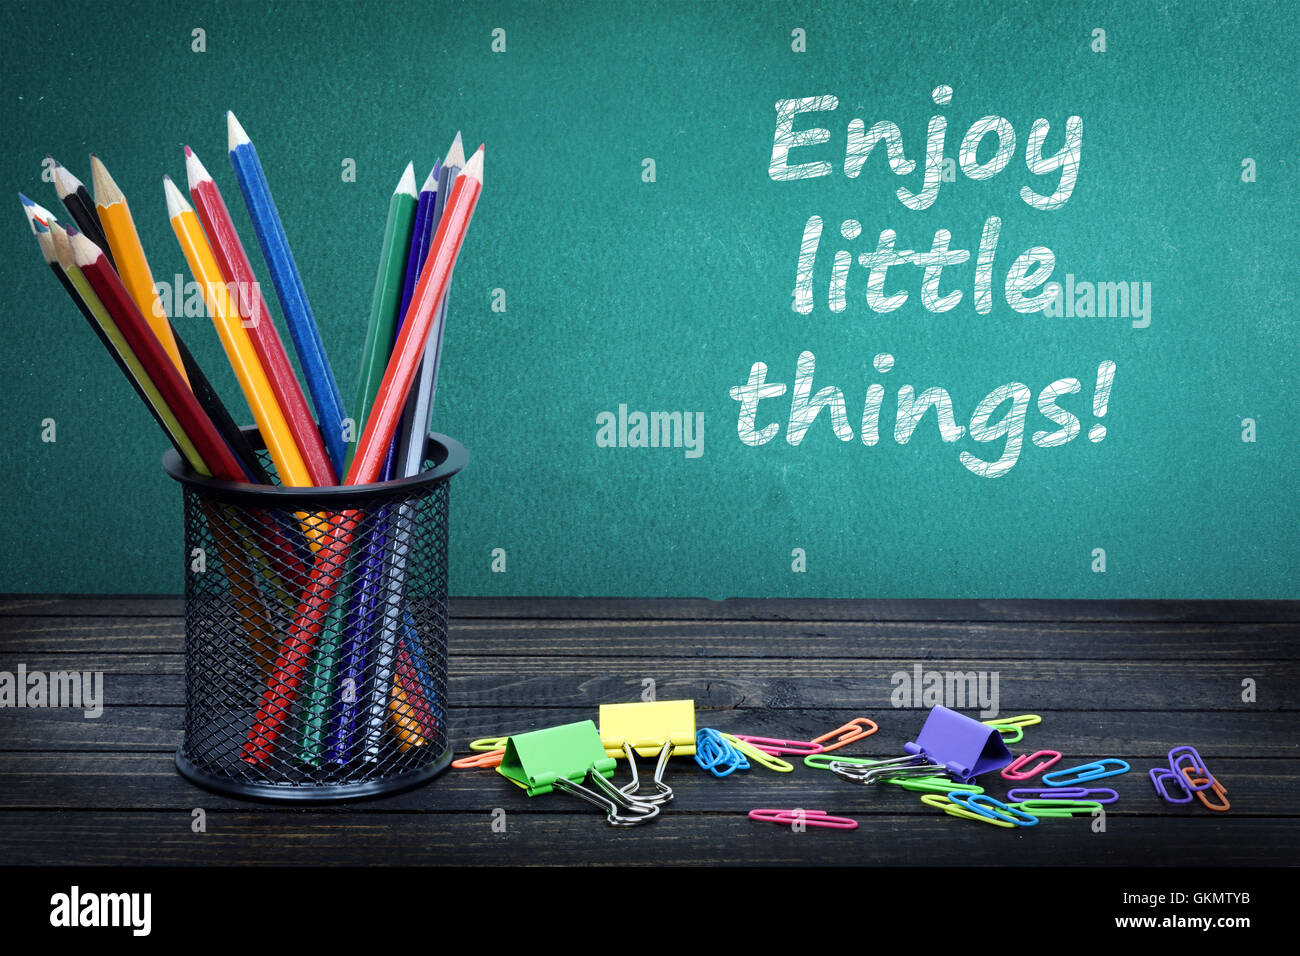 Enjoy little things text on green board and group of pencils Stock Photo